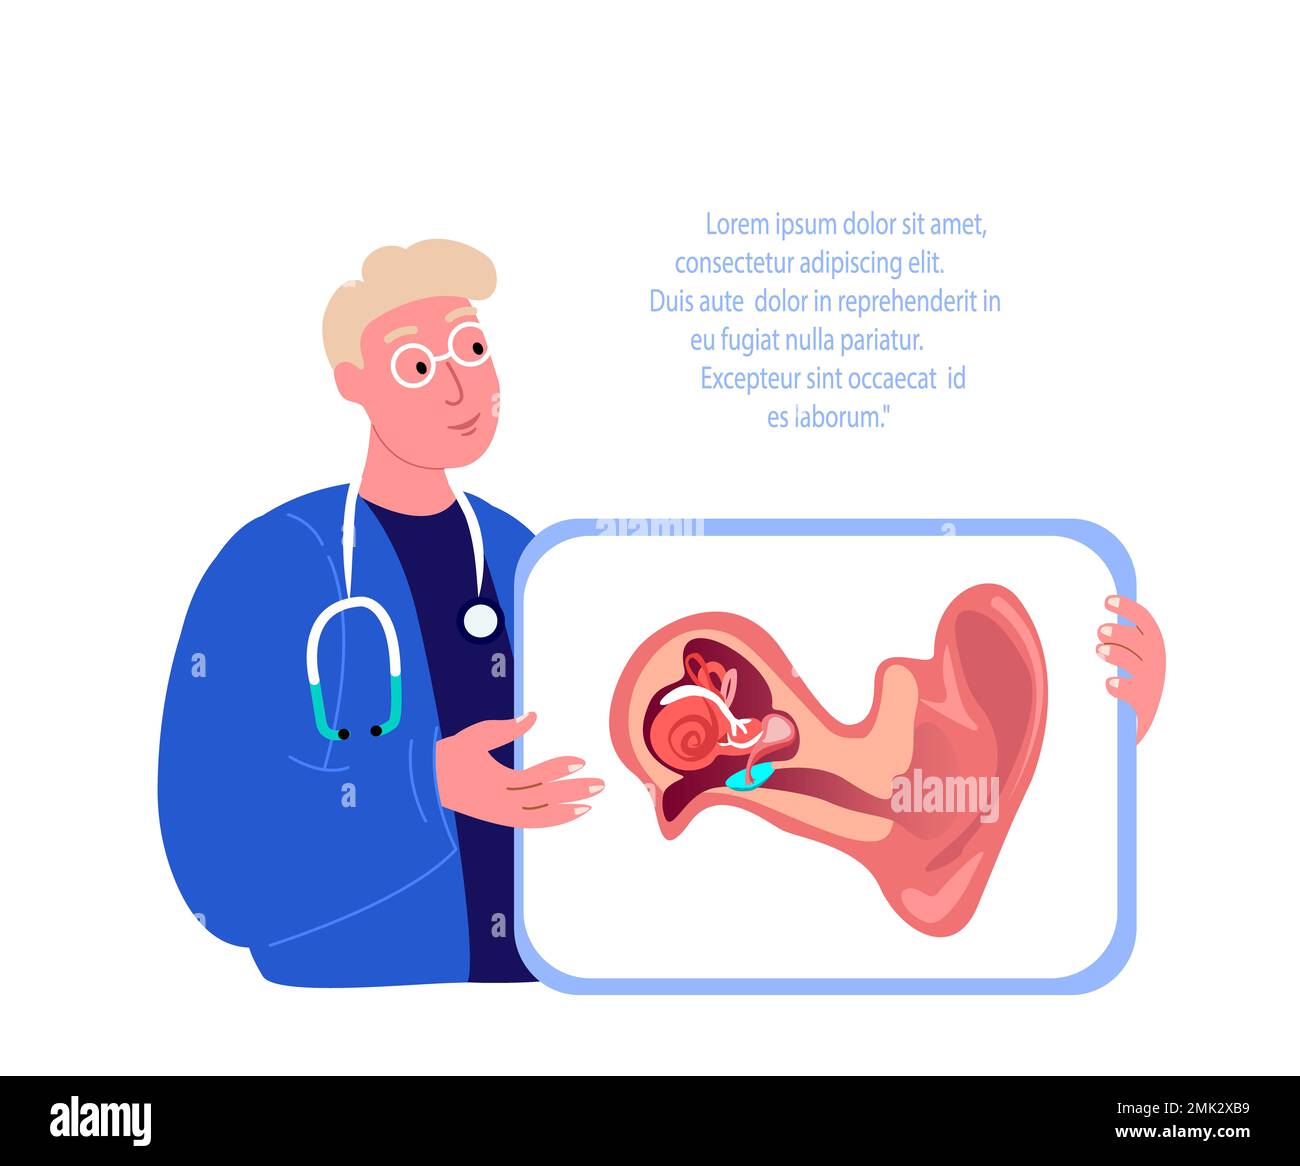 Audiologist Professors Scientists ENT-Doctors Examine Ear Anatomy Structure.Inflammation,Ear Pain.Otitis Digital Treatment.Research,Clinical Investiga Stock Photo